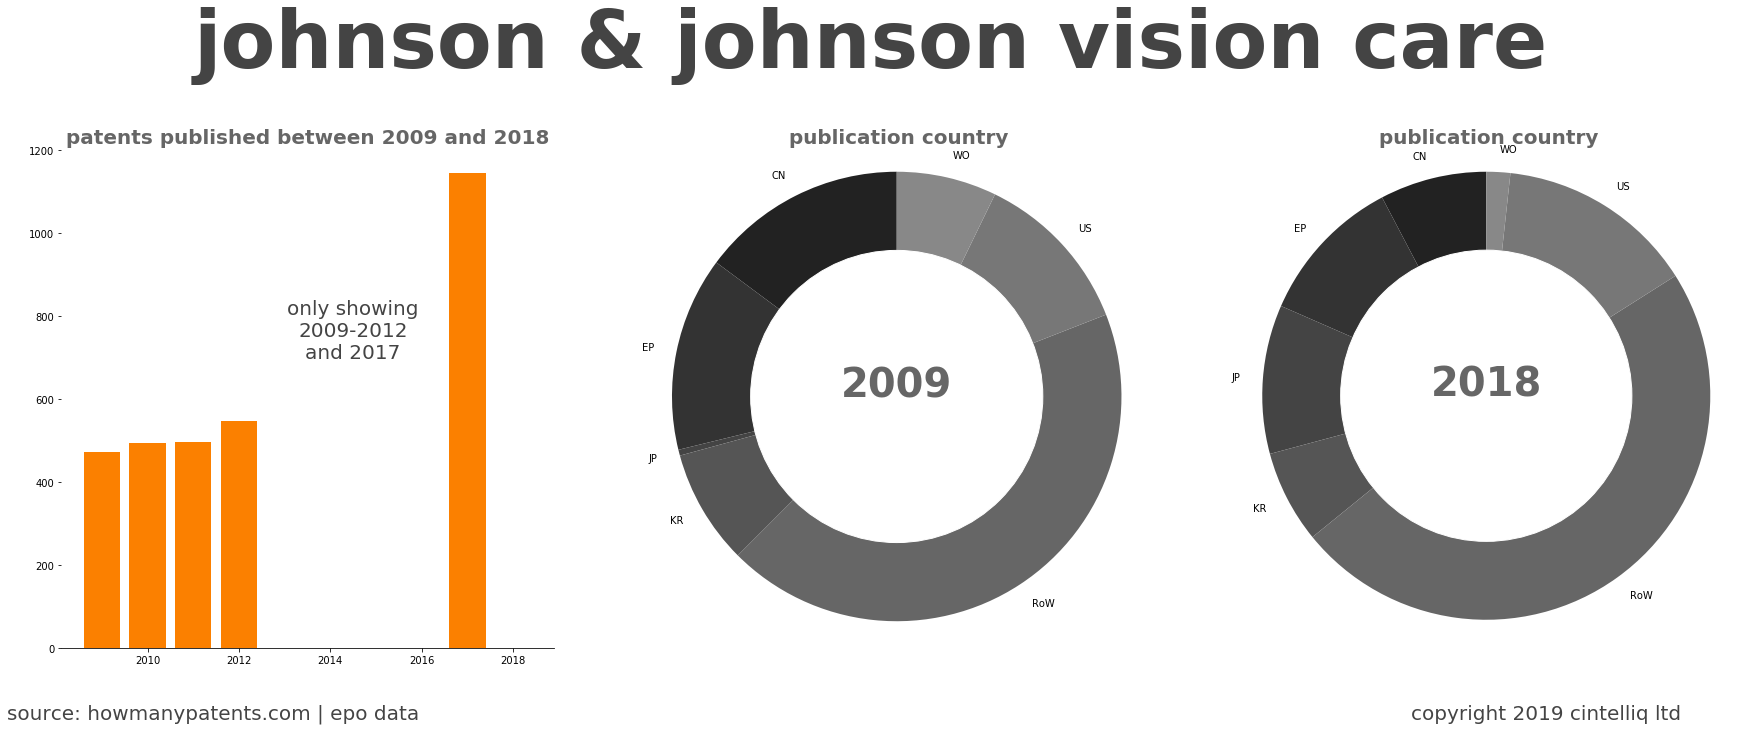 summary of patents for Johnson & Johnson Vision Care